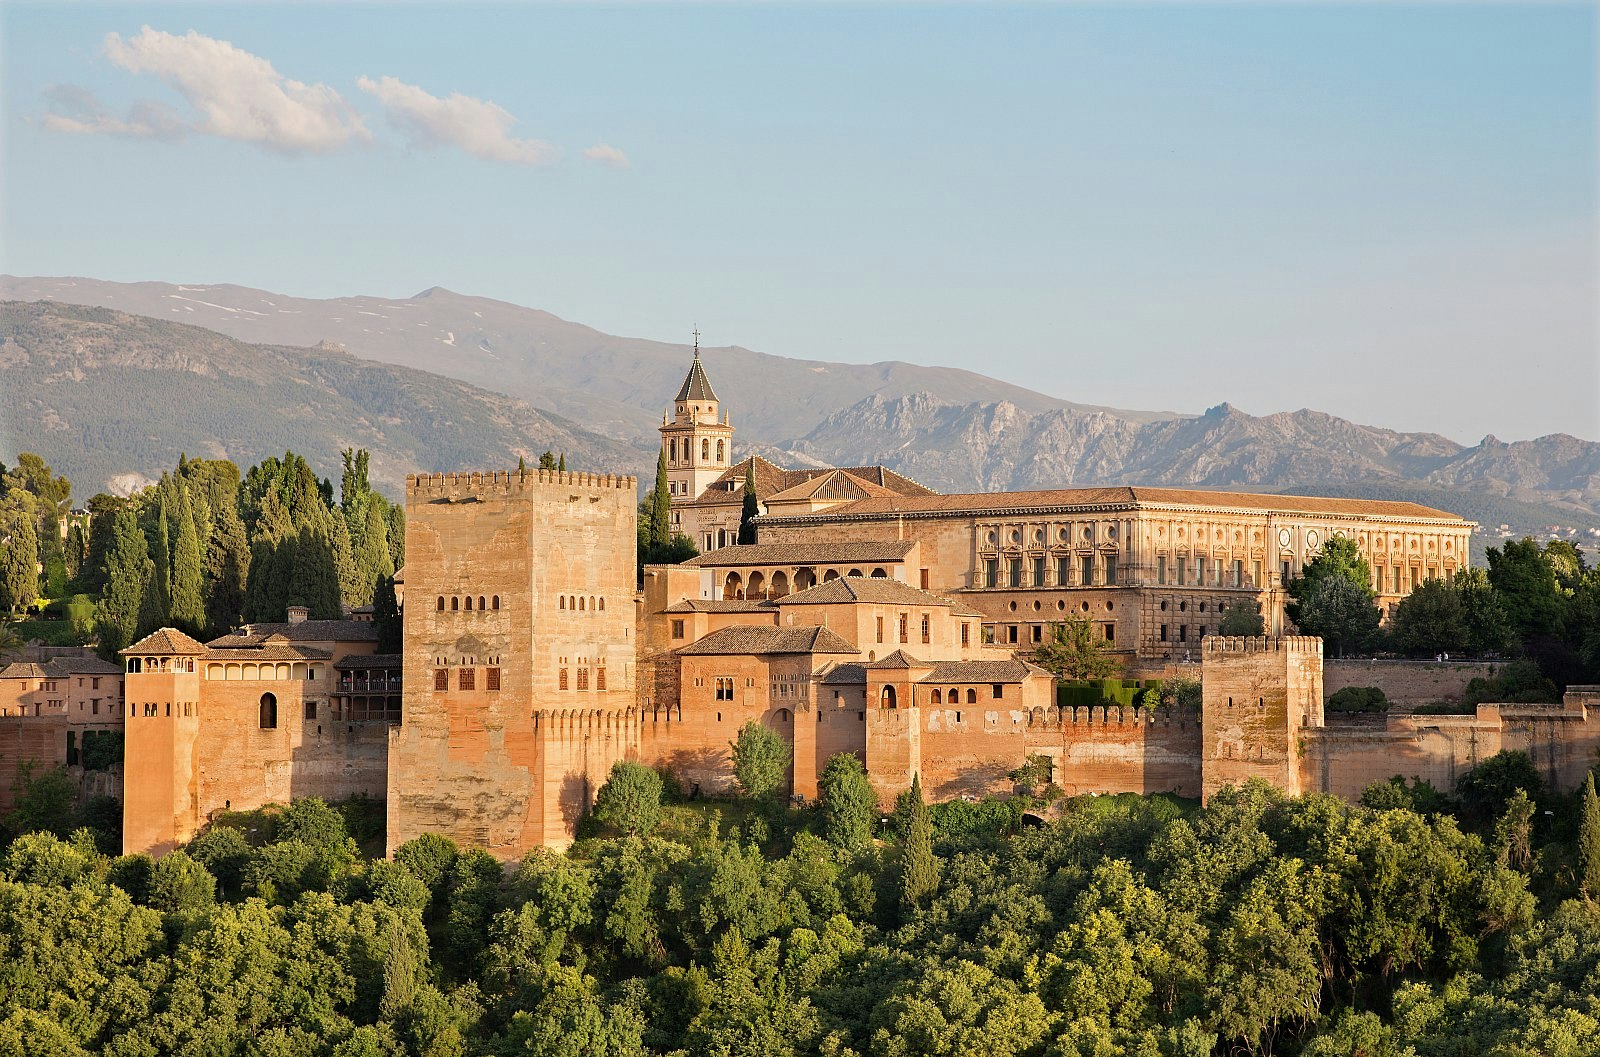 The sand-coloured Moorish palace complex of the Alhambra, with verdant trees in the foreground and stark mountains as the backdrop.